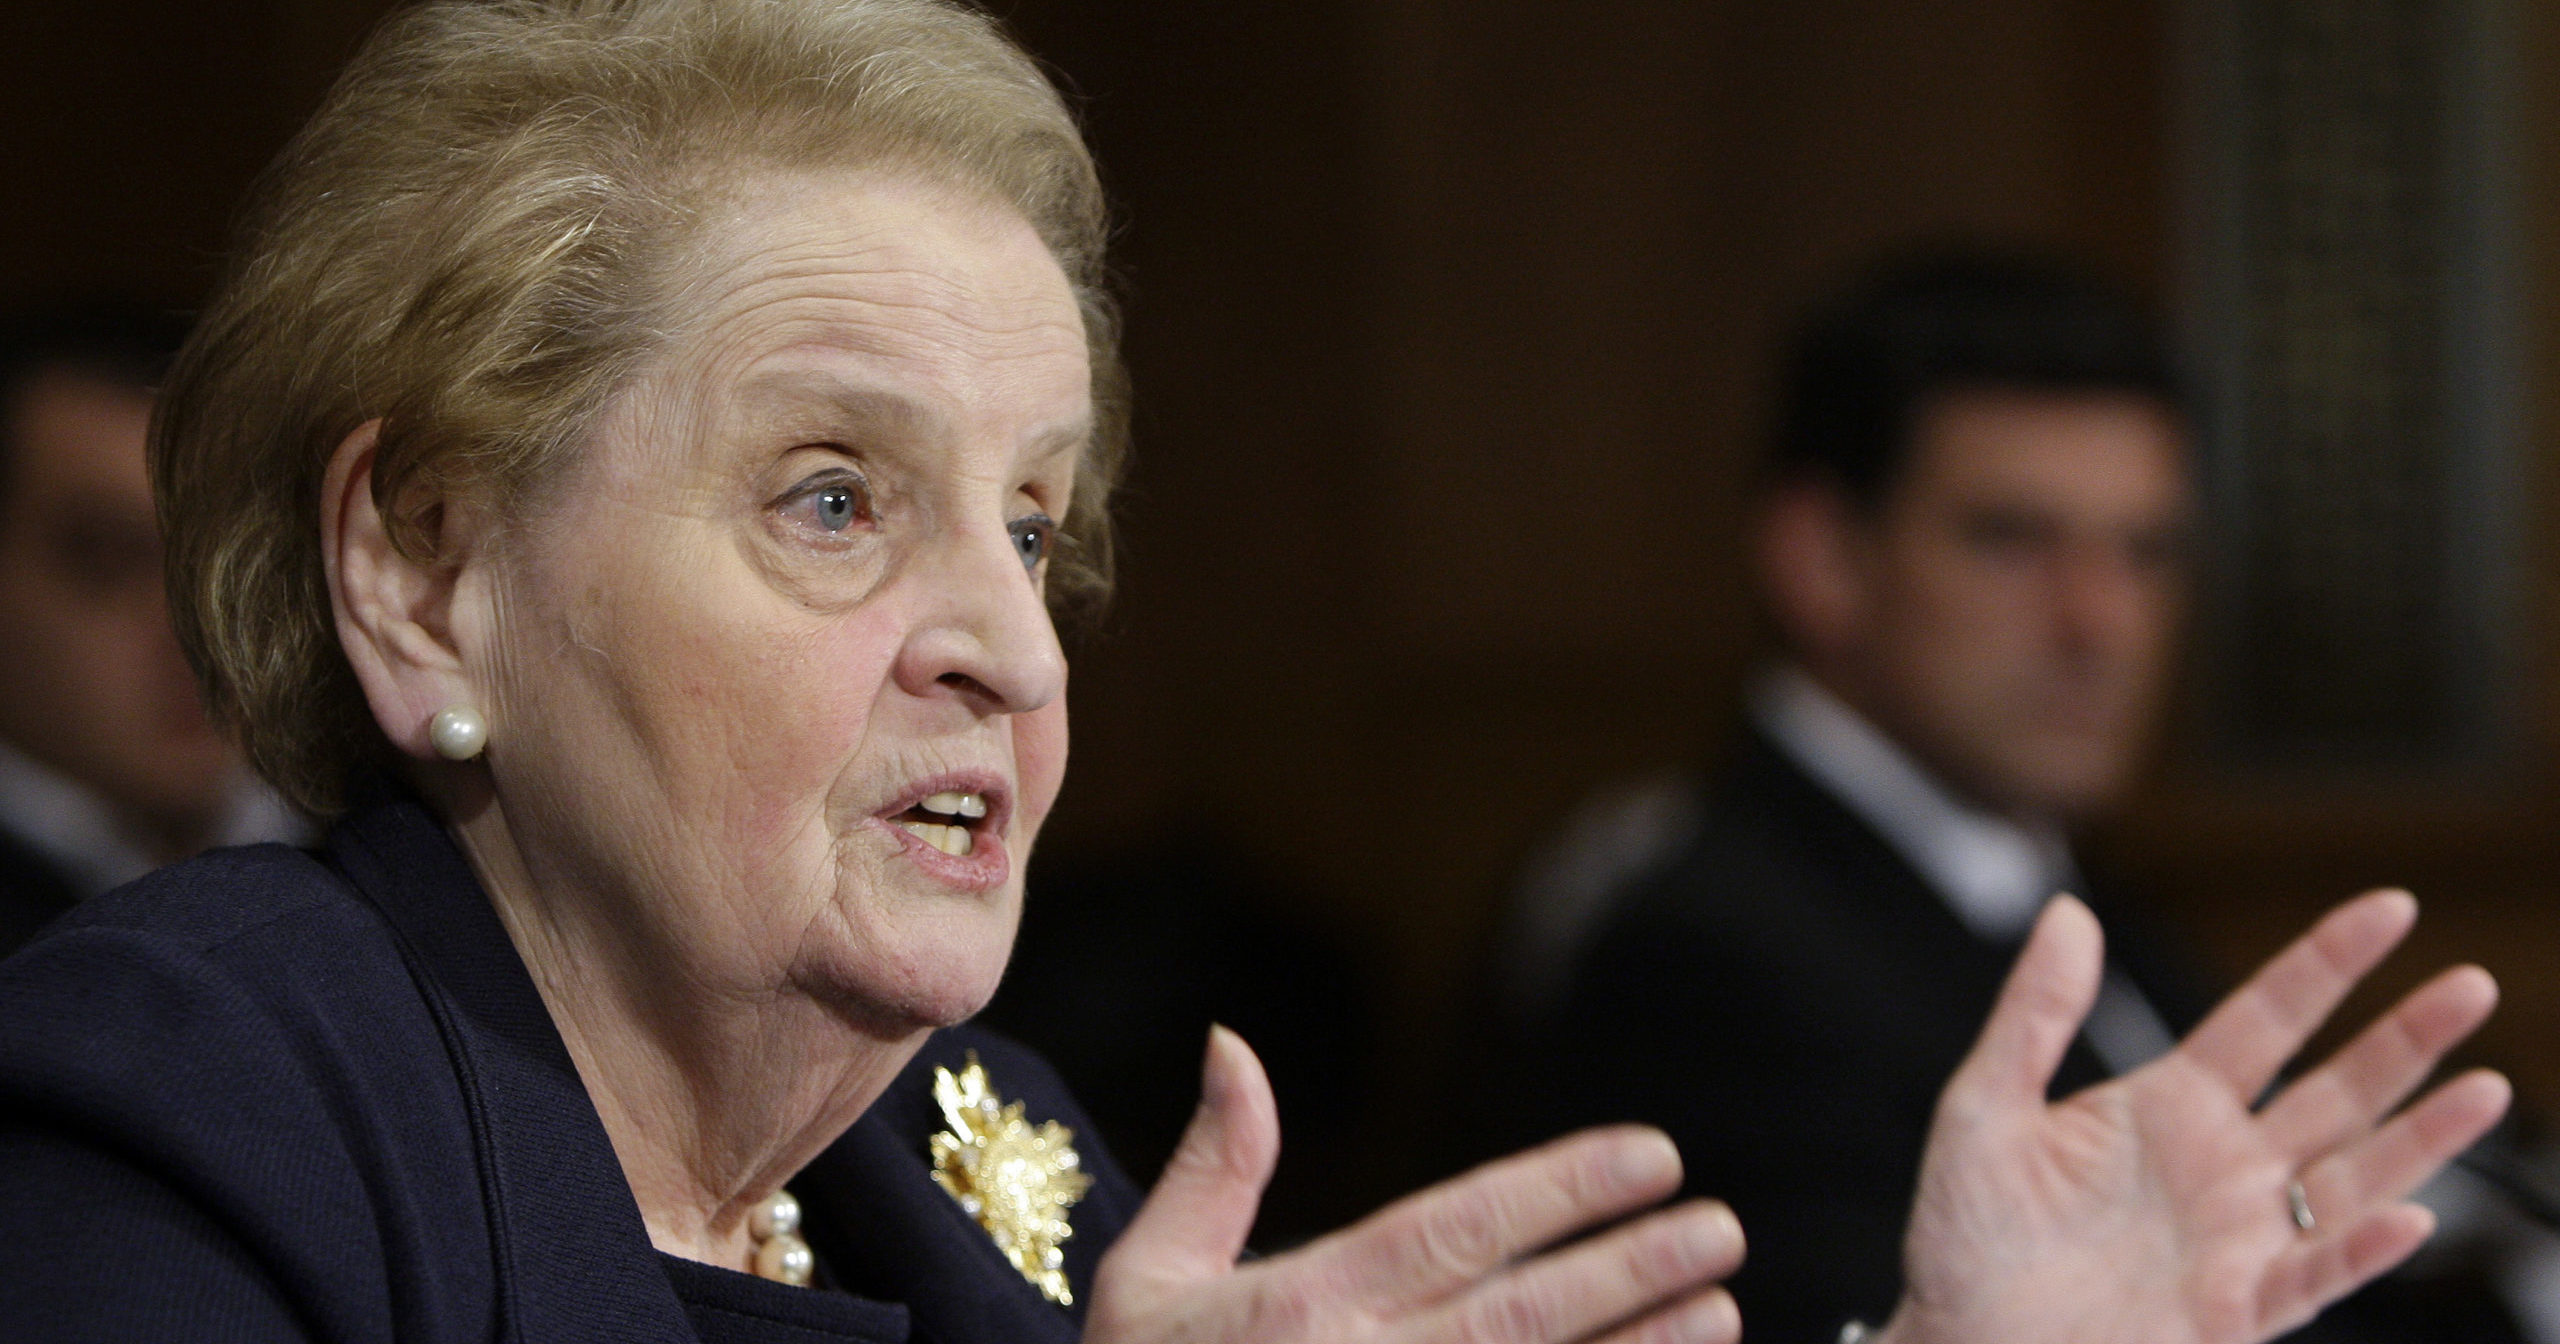 Former Secretary of State Madeleine Albright testifies before the Senate Foreign Relations Committee on Capitol Hill in Washington, D.C., on Oct. 22, 2009.